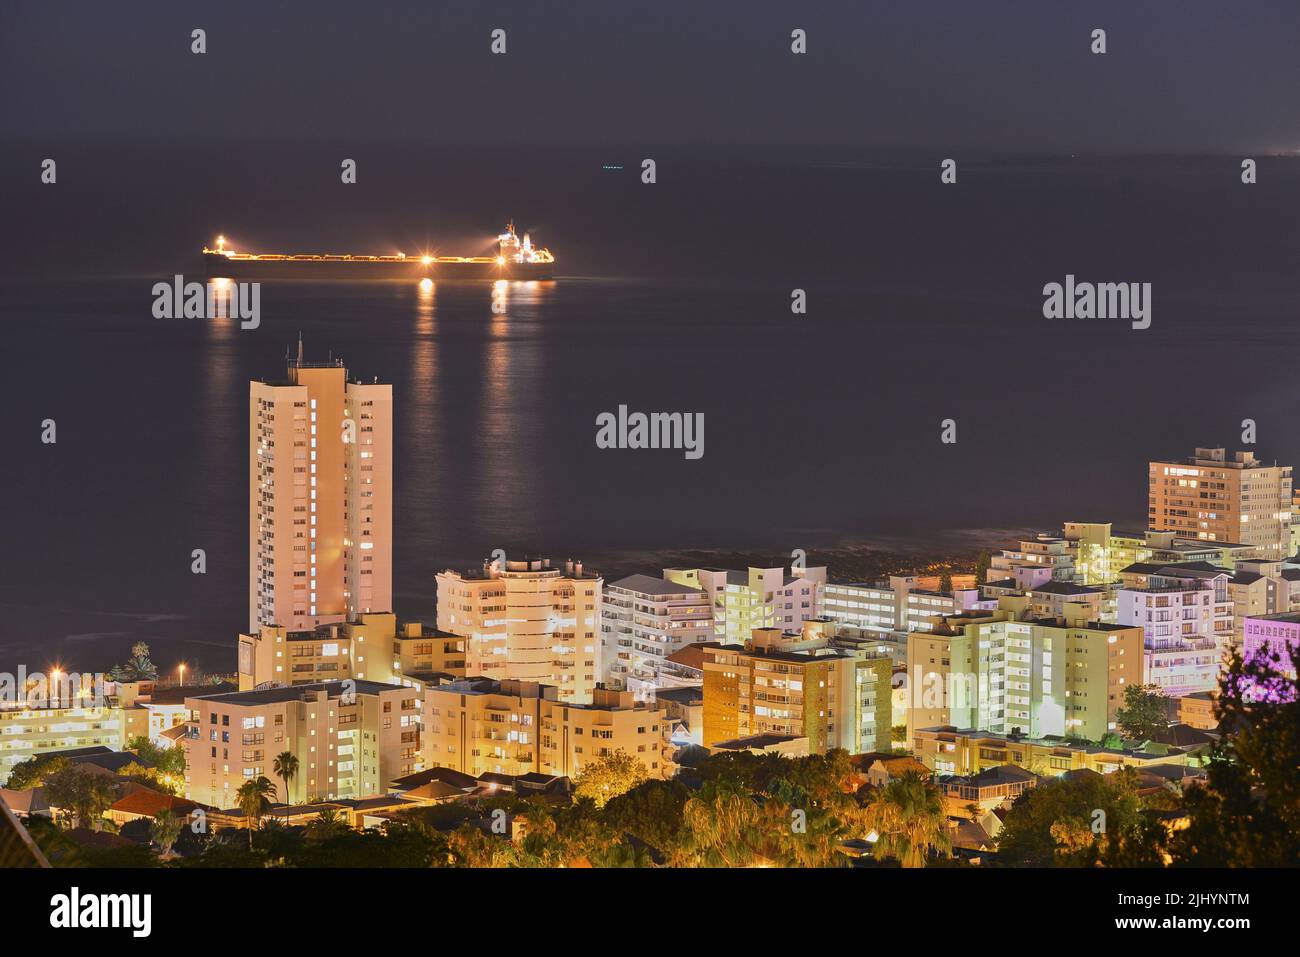 View of skyscraper and city buildings lighting up the dark sky at night, alongside the ocean horizon. Beautiful scenic urban landscape in the evening Stock Photo